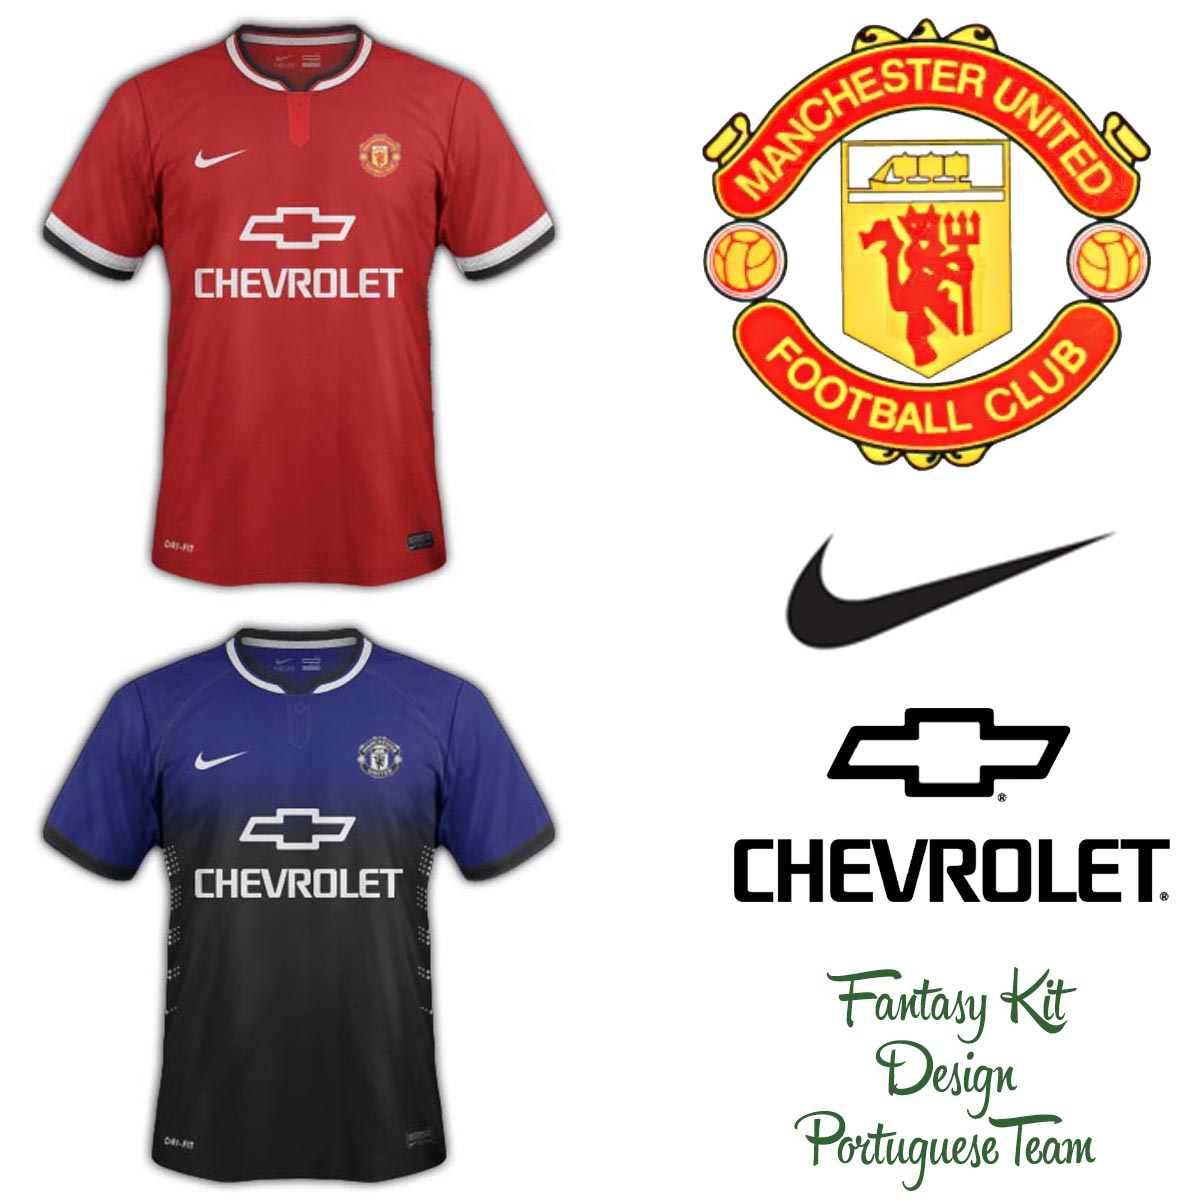 manchester_united_fantasy_home_and_away_2014_2015_with_new_sponsor_chevrolet_20140512_1872239341.jpg